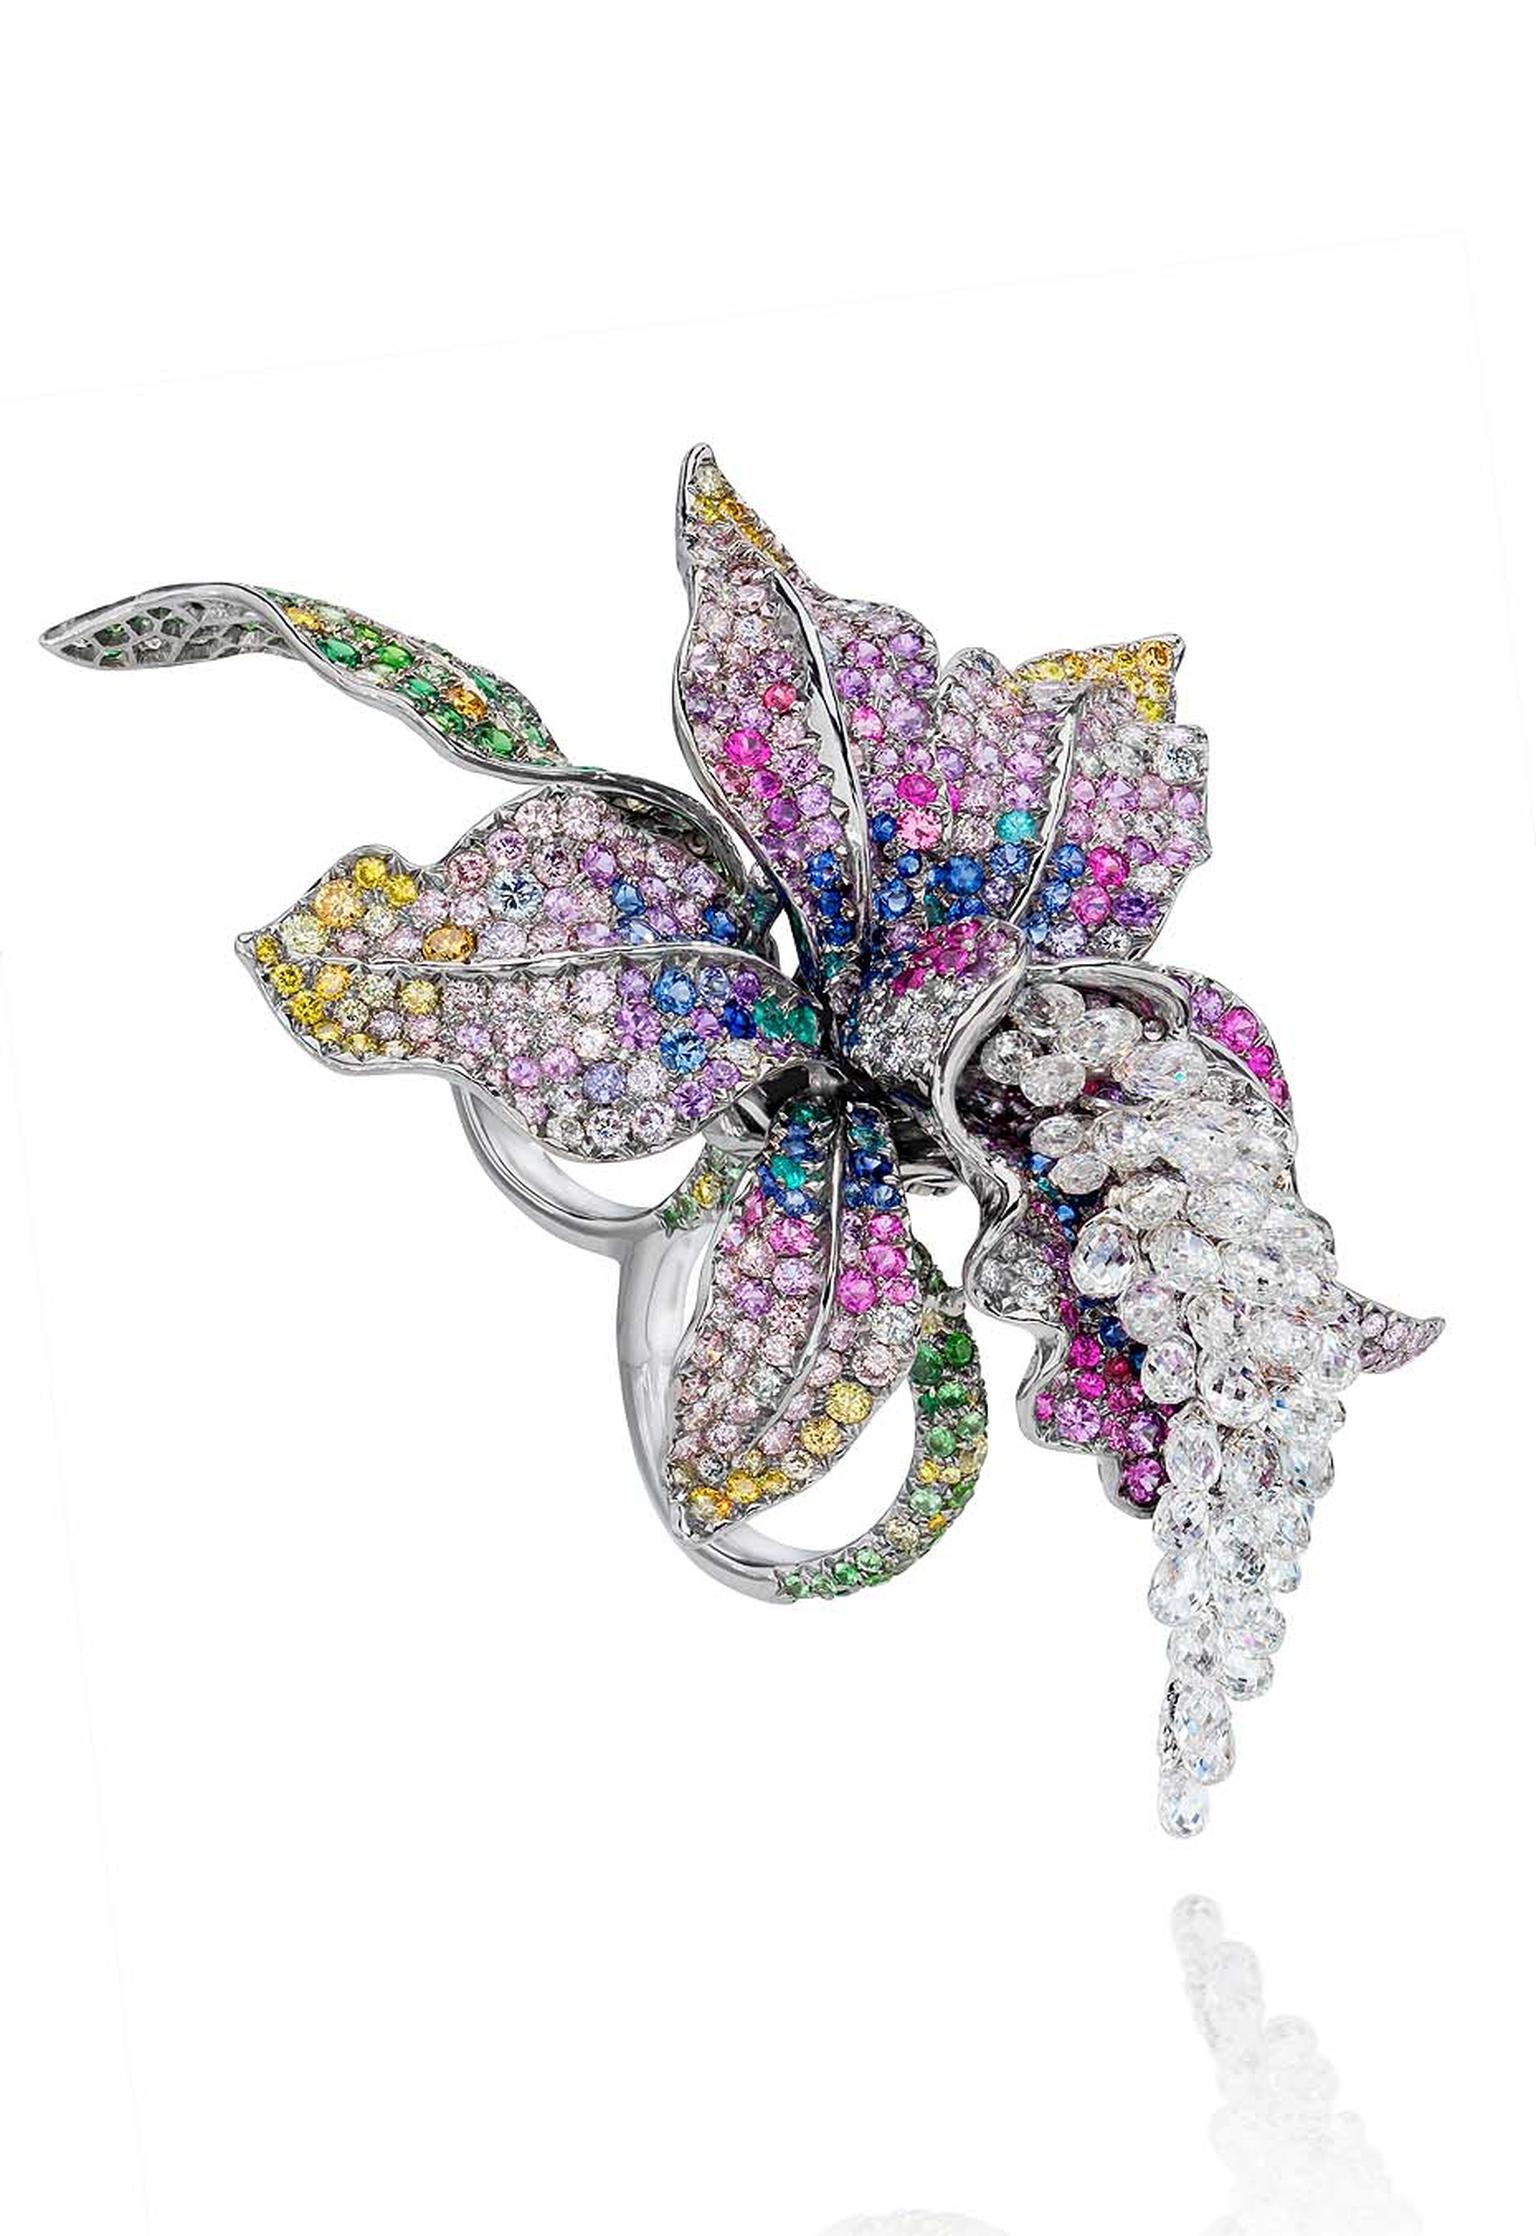 Anna Hu Enchanted Orchid Duo ring in white gold, set with 49 briolette diamonds totalling 12.19ct, multi-coloured sapphires, multi-coloured diamonds and Paraiba tourmalines.